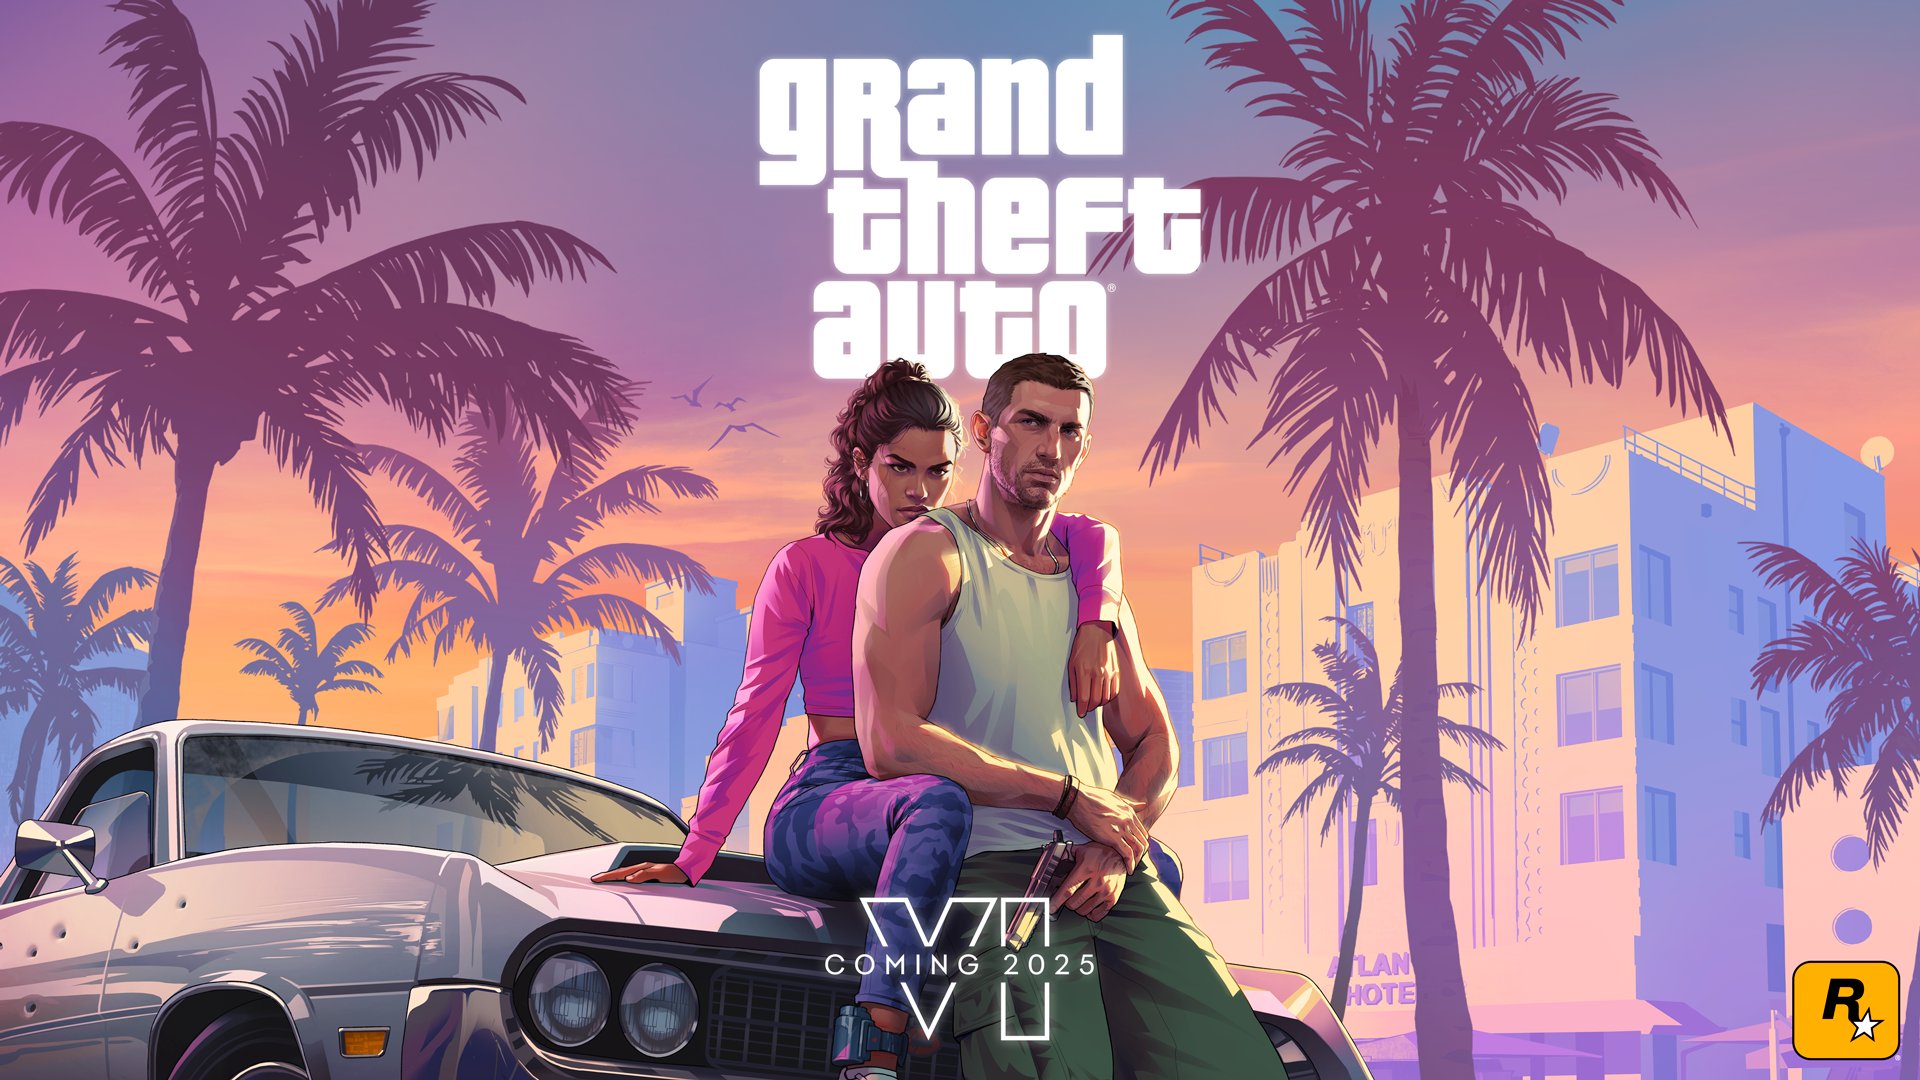 Grand Theft Auto VI now set for fall 2025 release